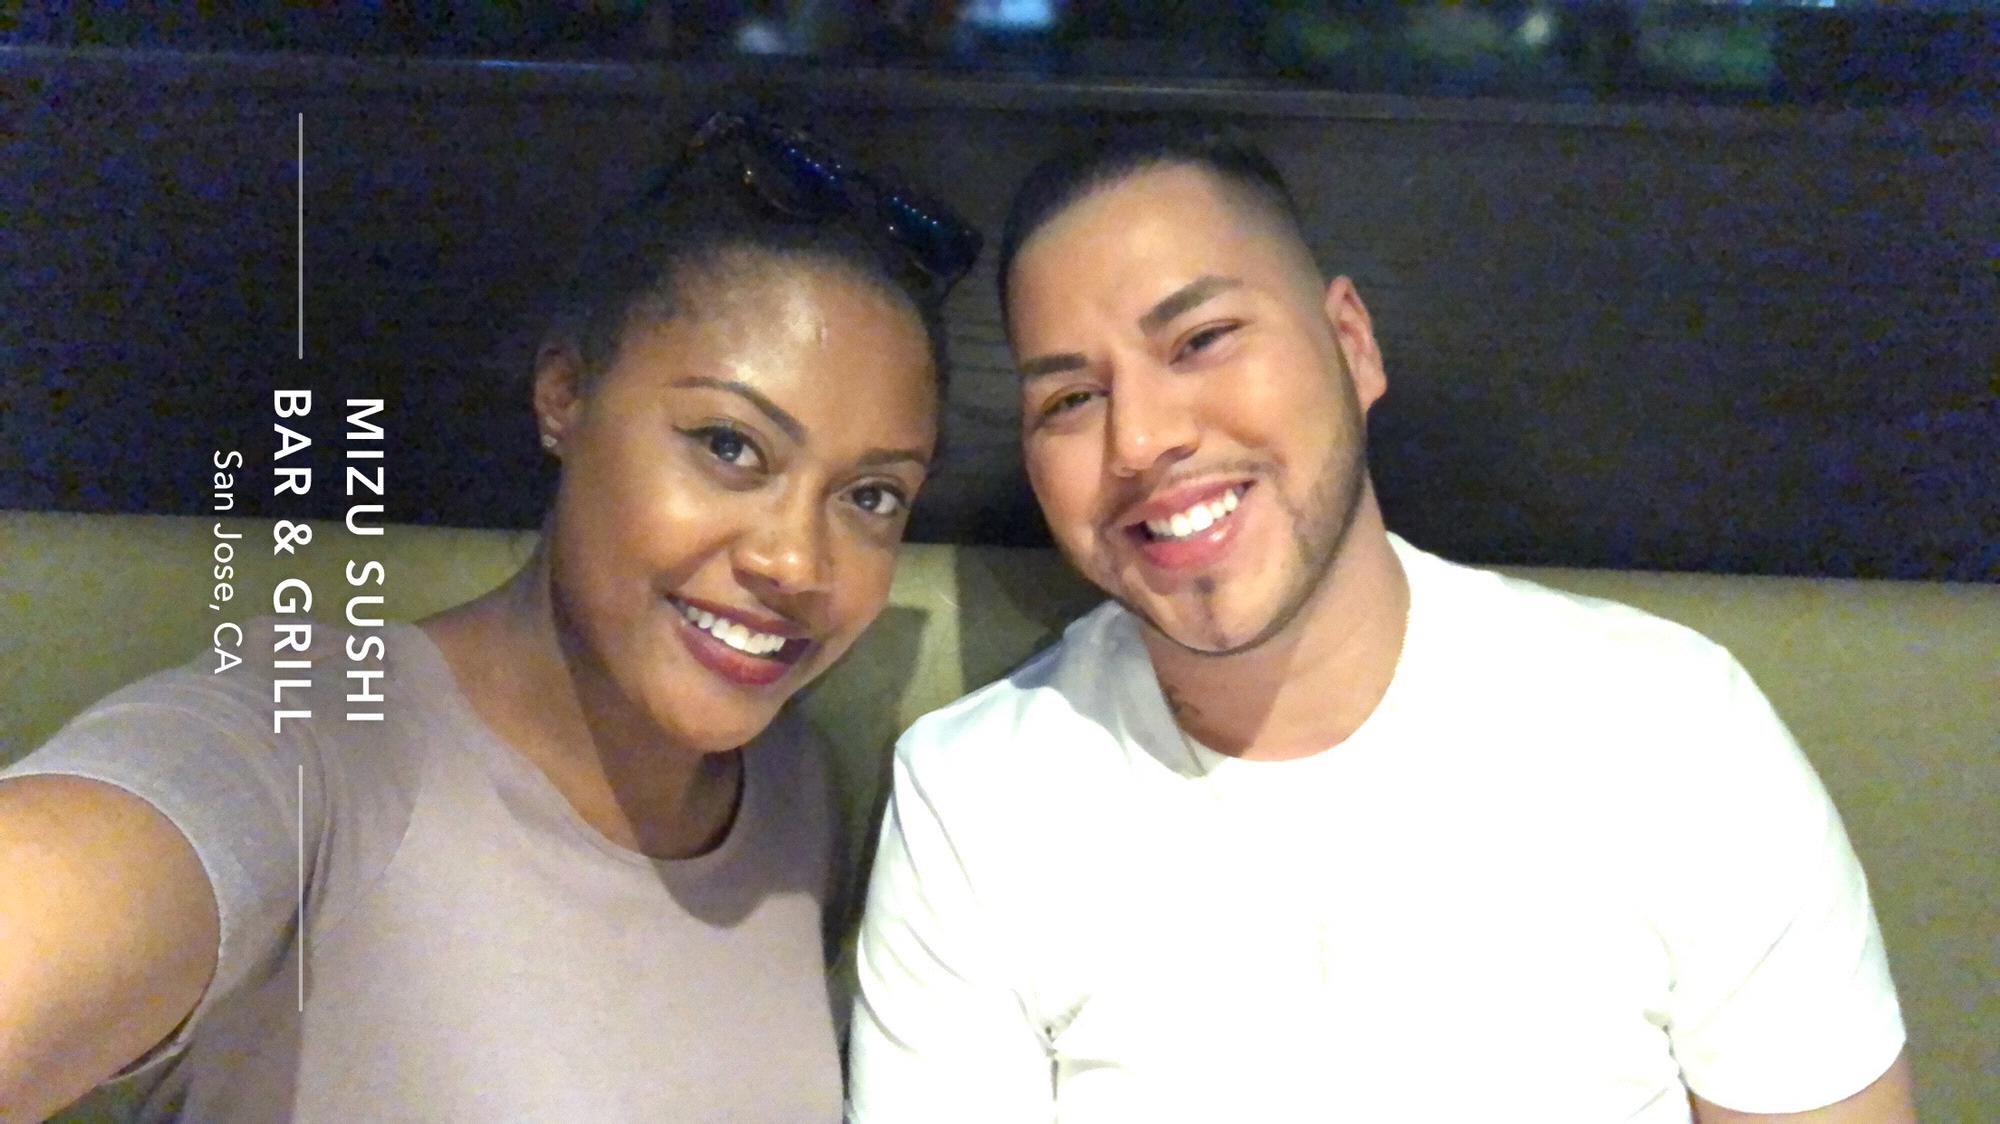 Kimberly & Ray together for her birthday at Mizu Sushi in Campbell, Ca. 18’